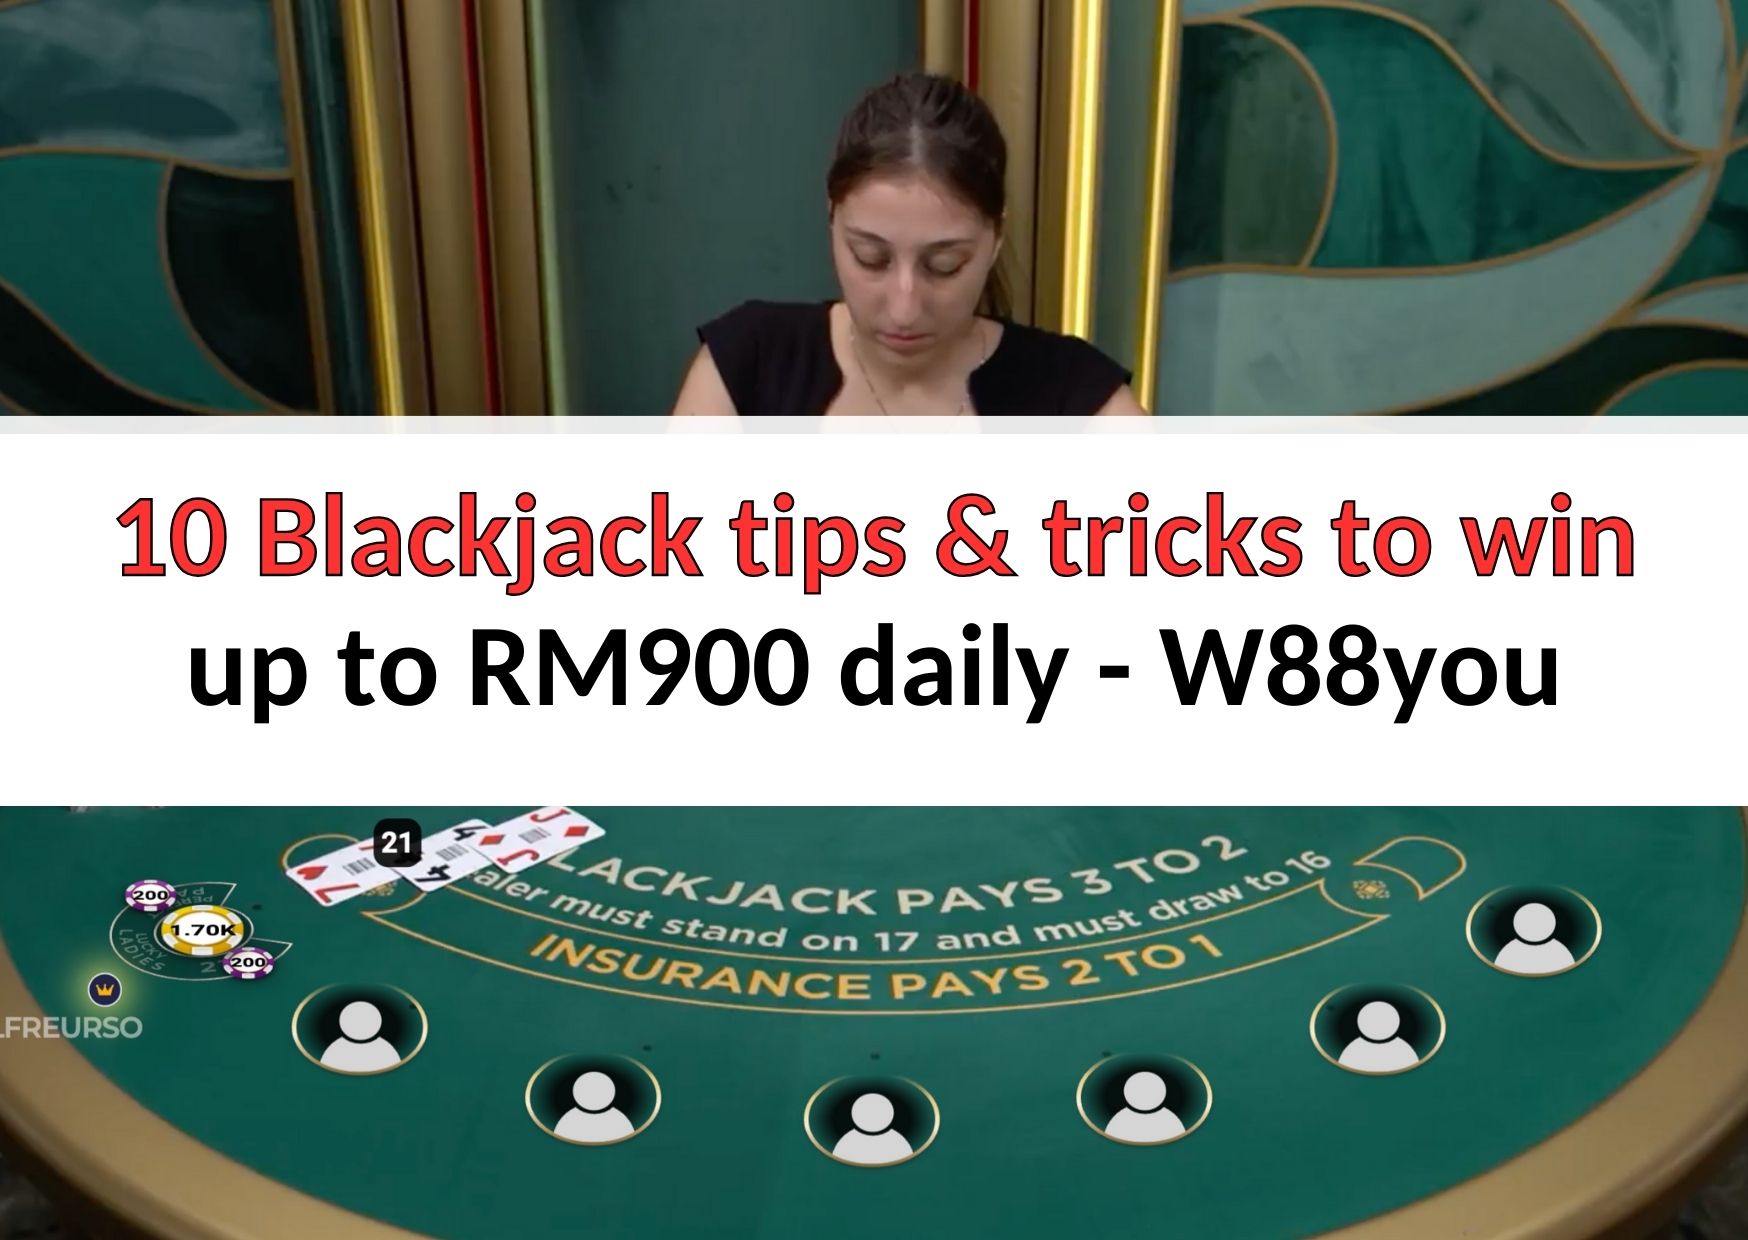 10 Blackjack tips & tricks to win up to RM900 daily - W88you